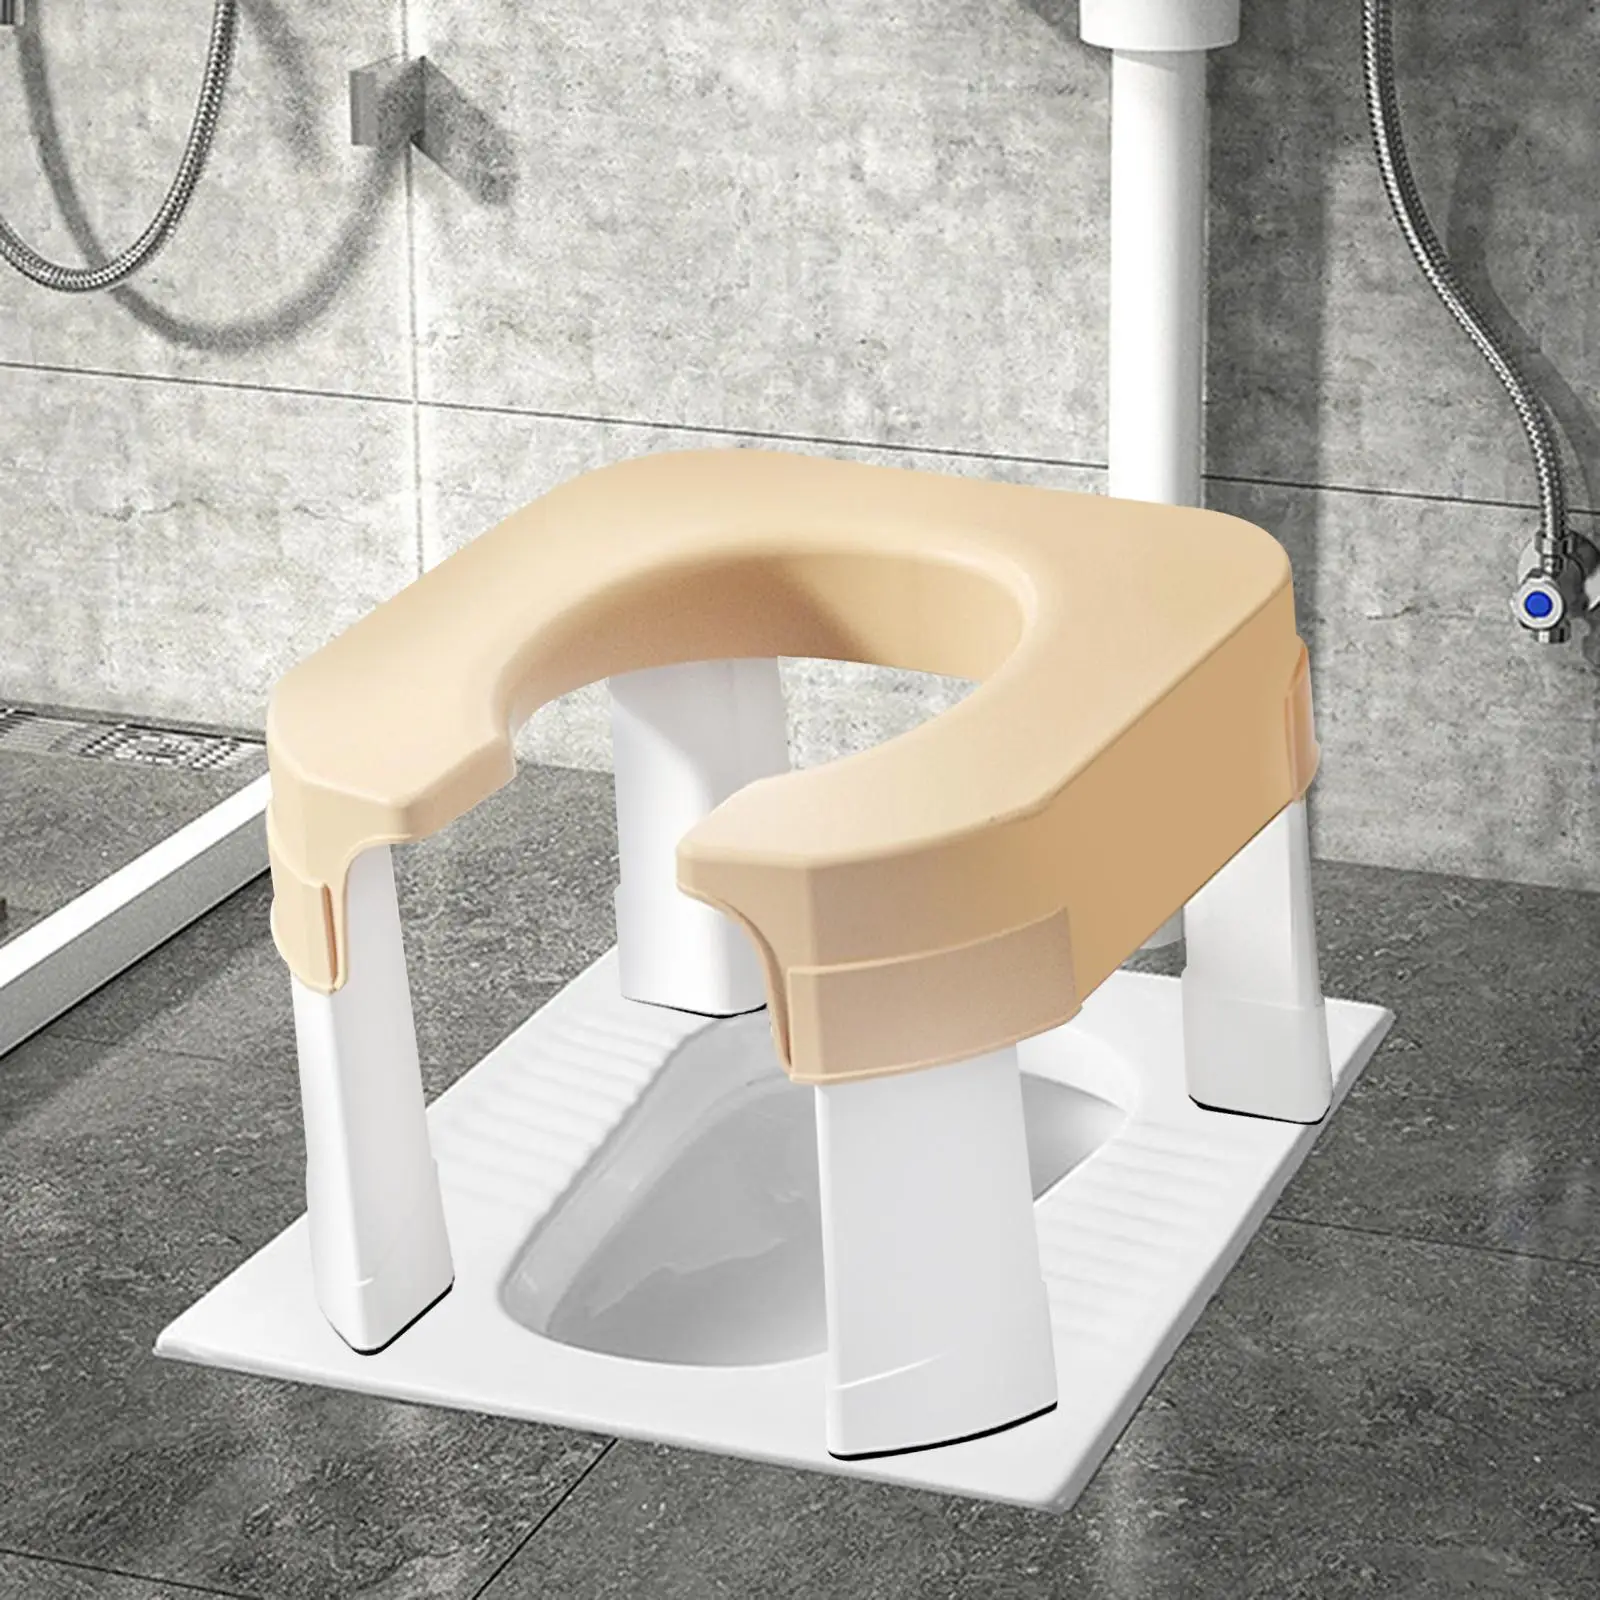 Squat Potty Multifunctional Assistance Compact Bathroom Squating Stool Stool Footrest for Bathroom Toilets Potty